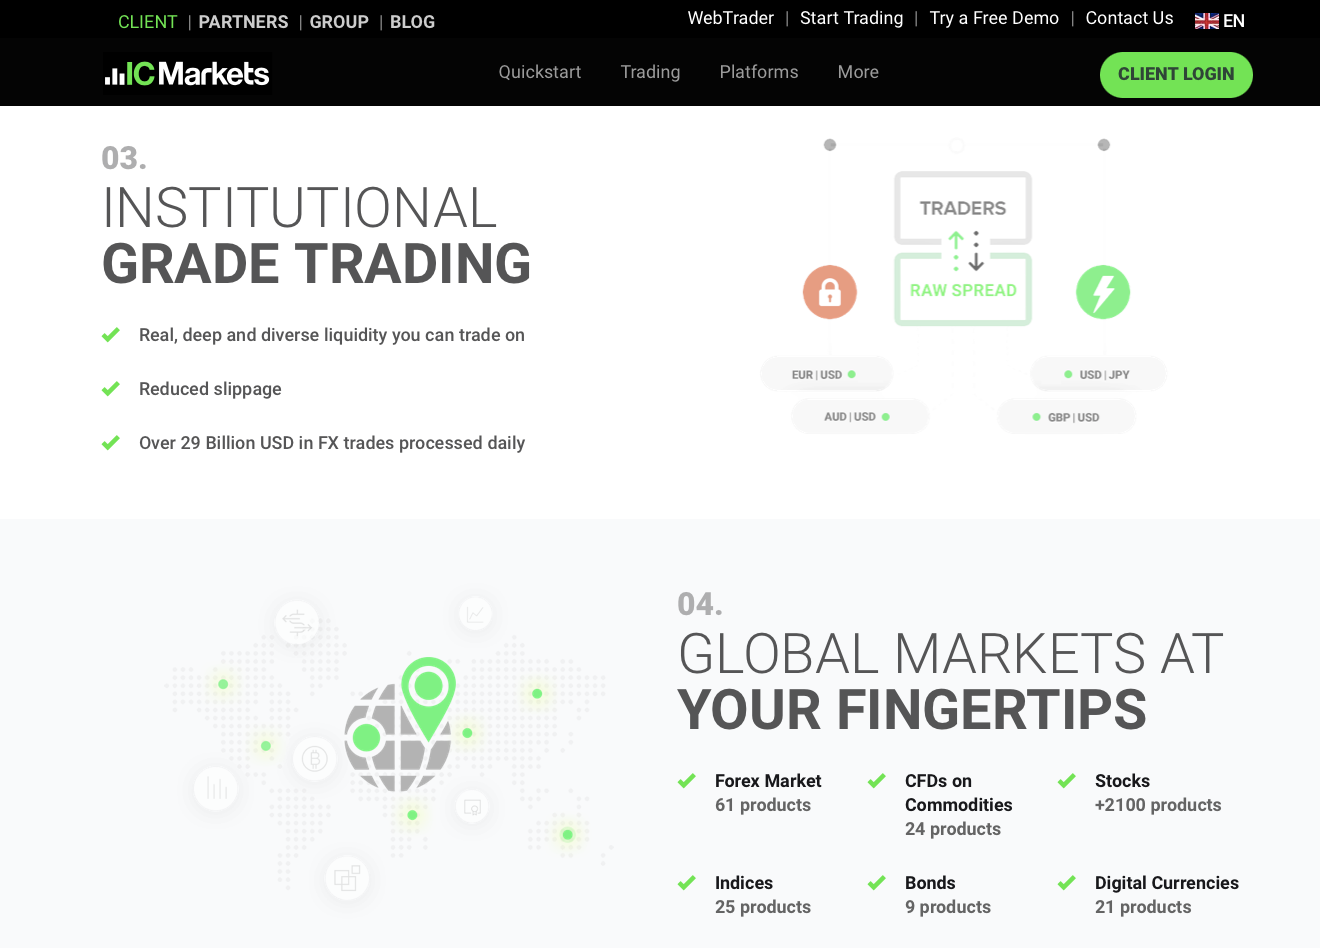 Advantages of IC Markets for traders